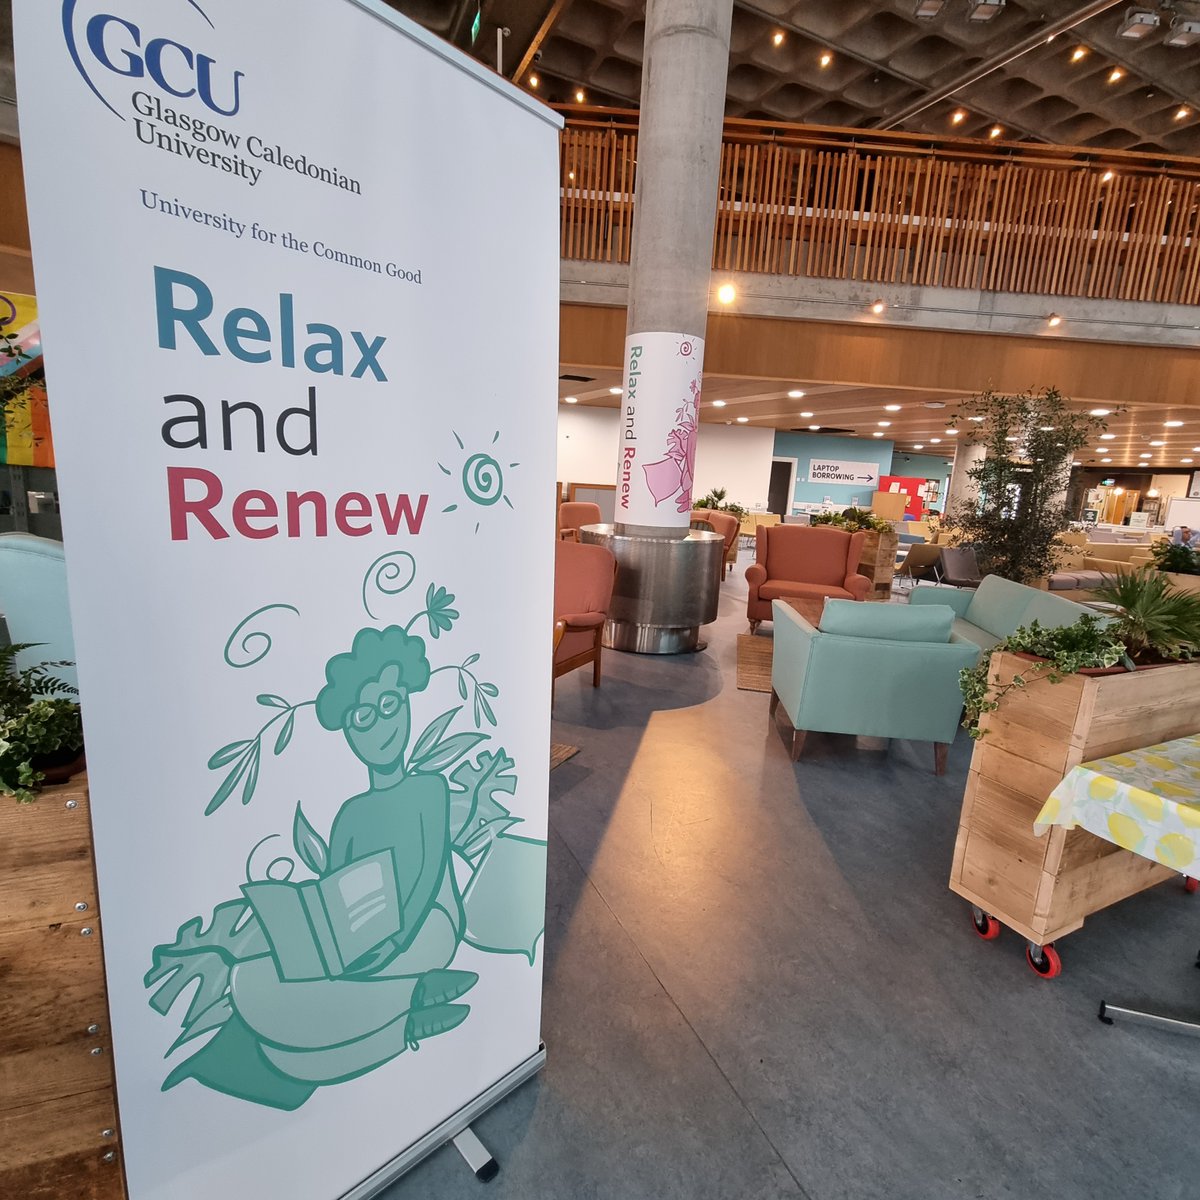 Join us in the Relax and Renew space of the @SAFLibraryGCU for our Carers Event tomorrow! Thu 5th Oct, 11am - 1pm Find out about support for carers at @CaledonianNews and from @CarersTrustScot